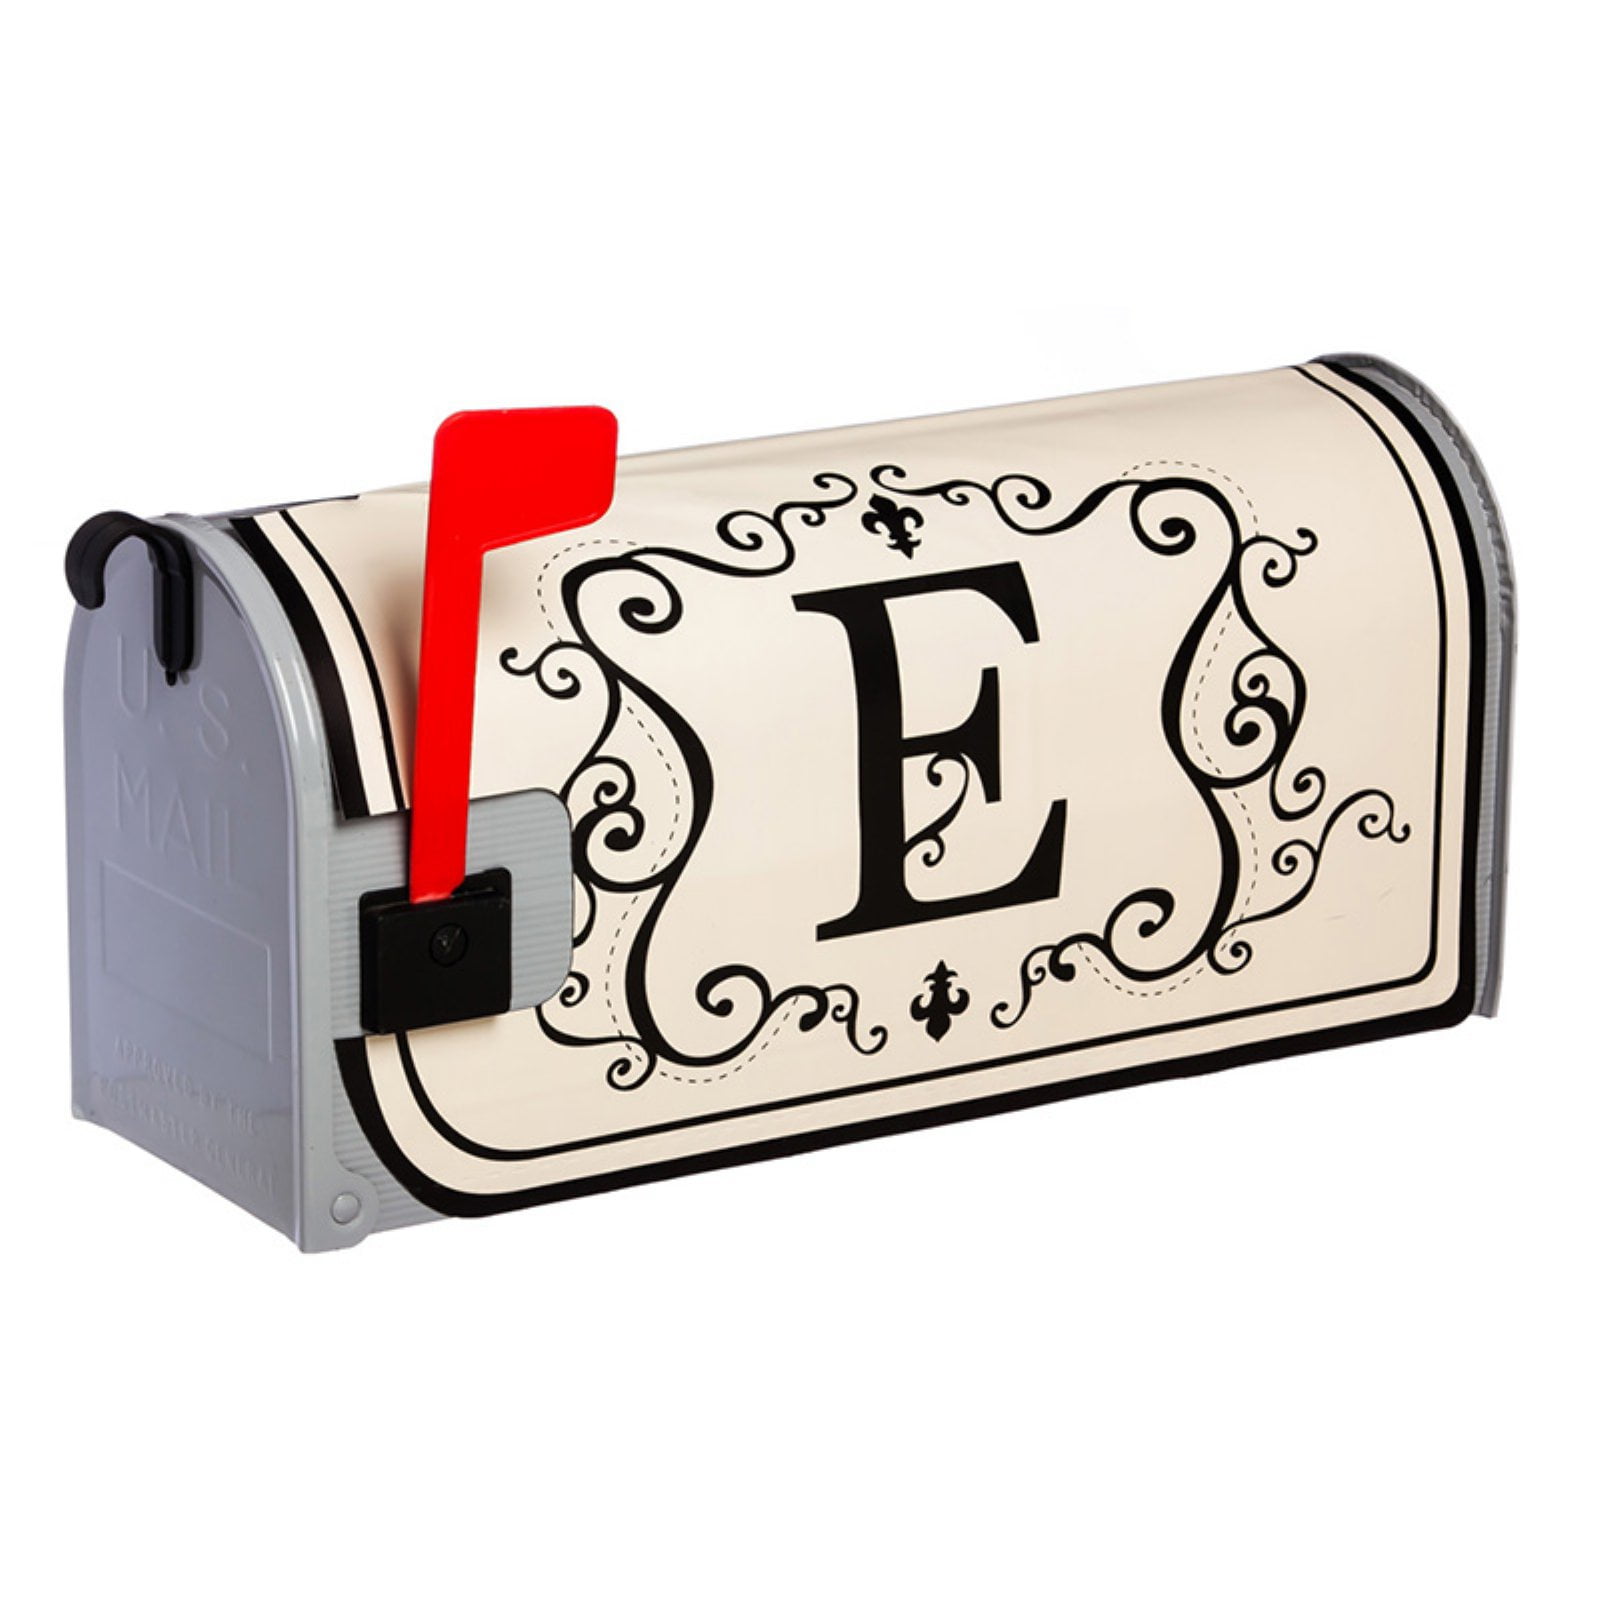 Football Stadium Print Mailbox Covers Magnetic Standard Size Mail Boxes Makeover Mail Wraps Cover Letter Post Box 